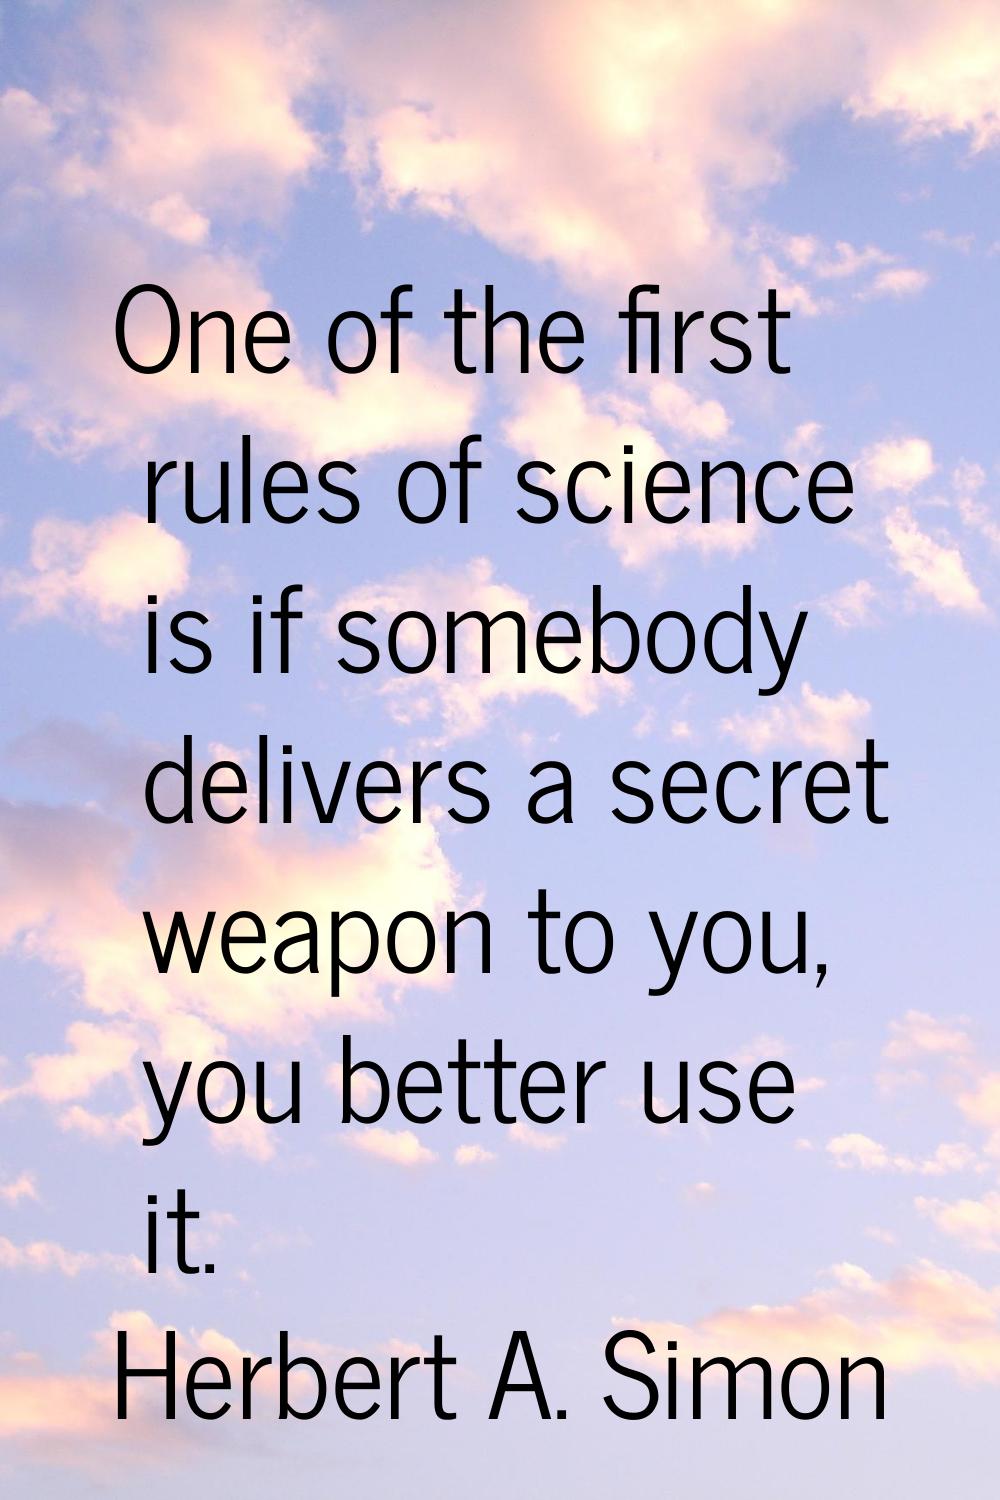 One of the first rules of science is if somebody delivers a secret weapon to you, you better use it